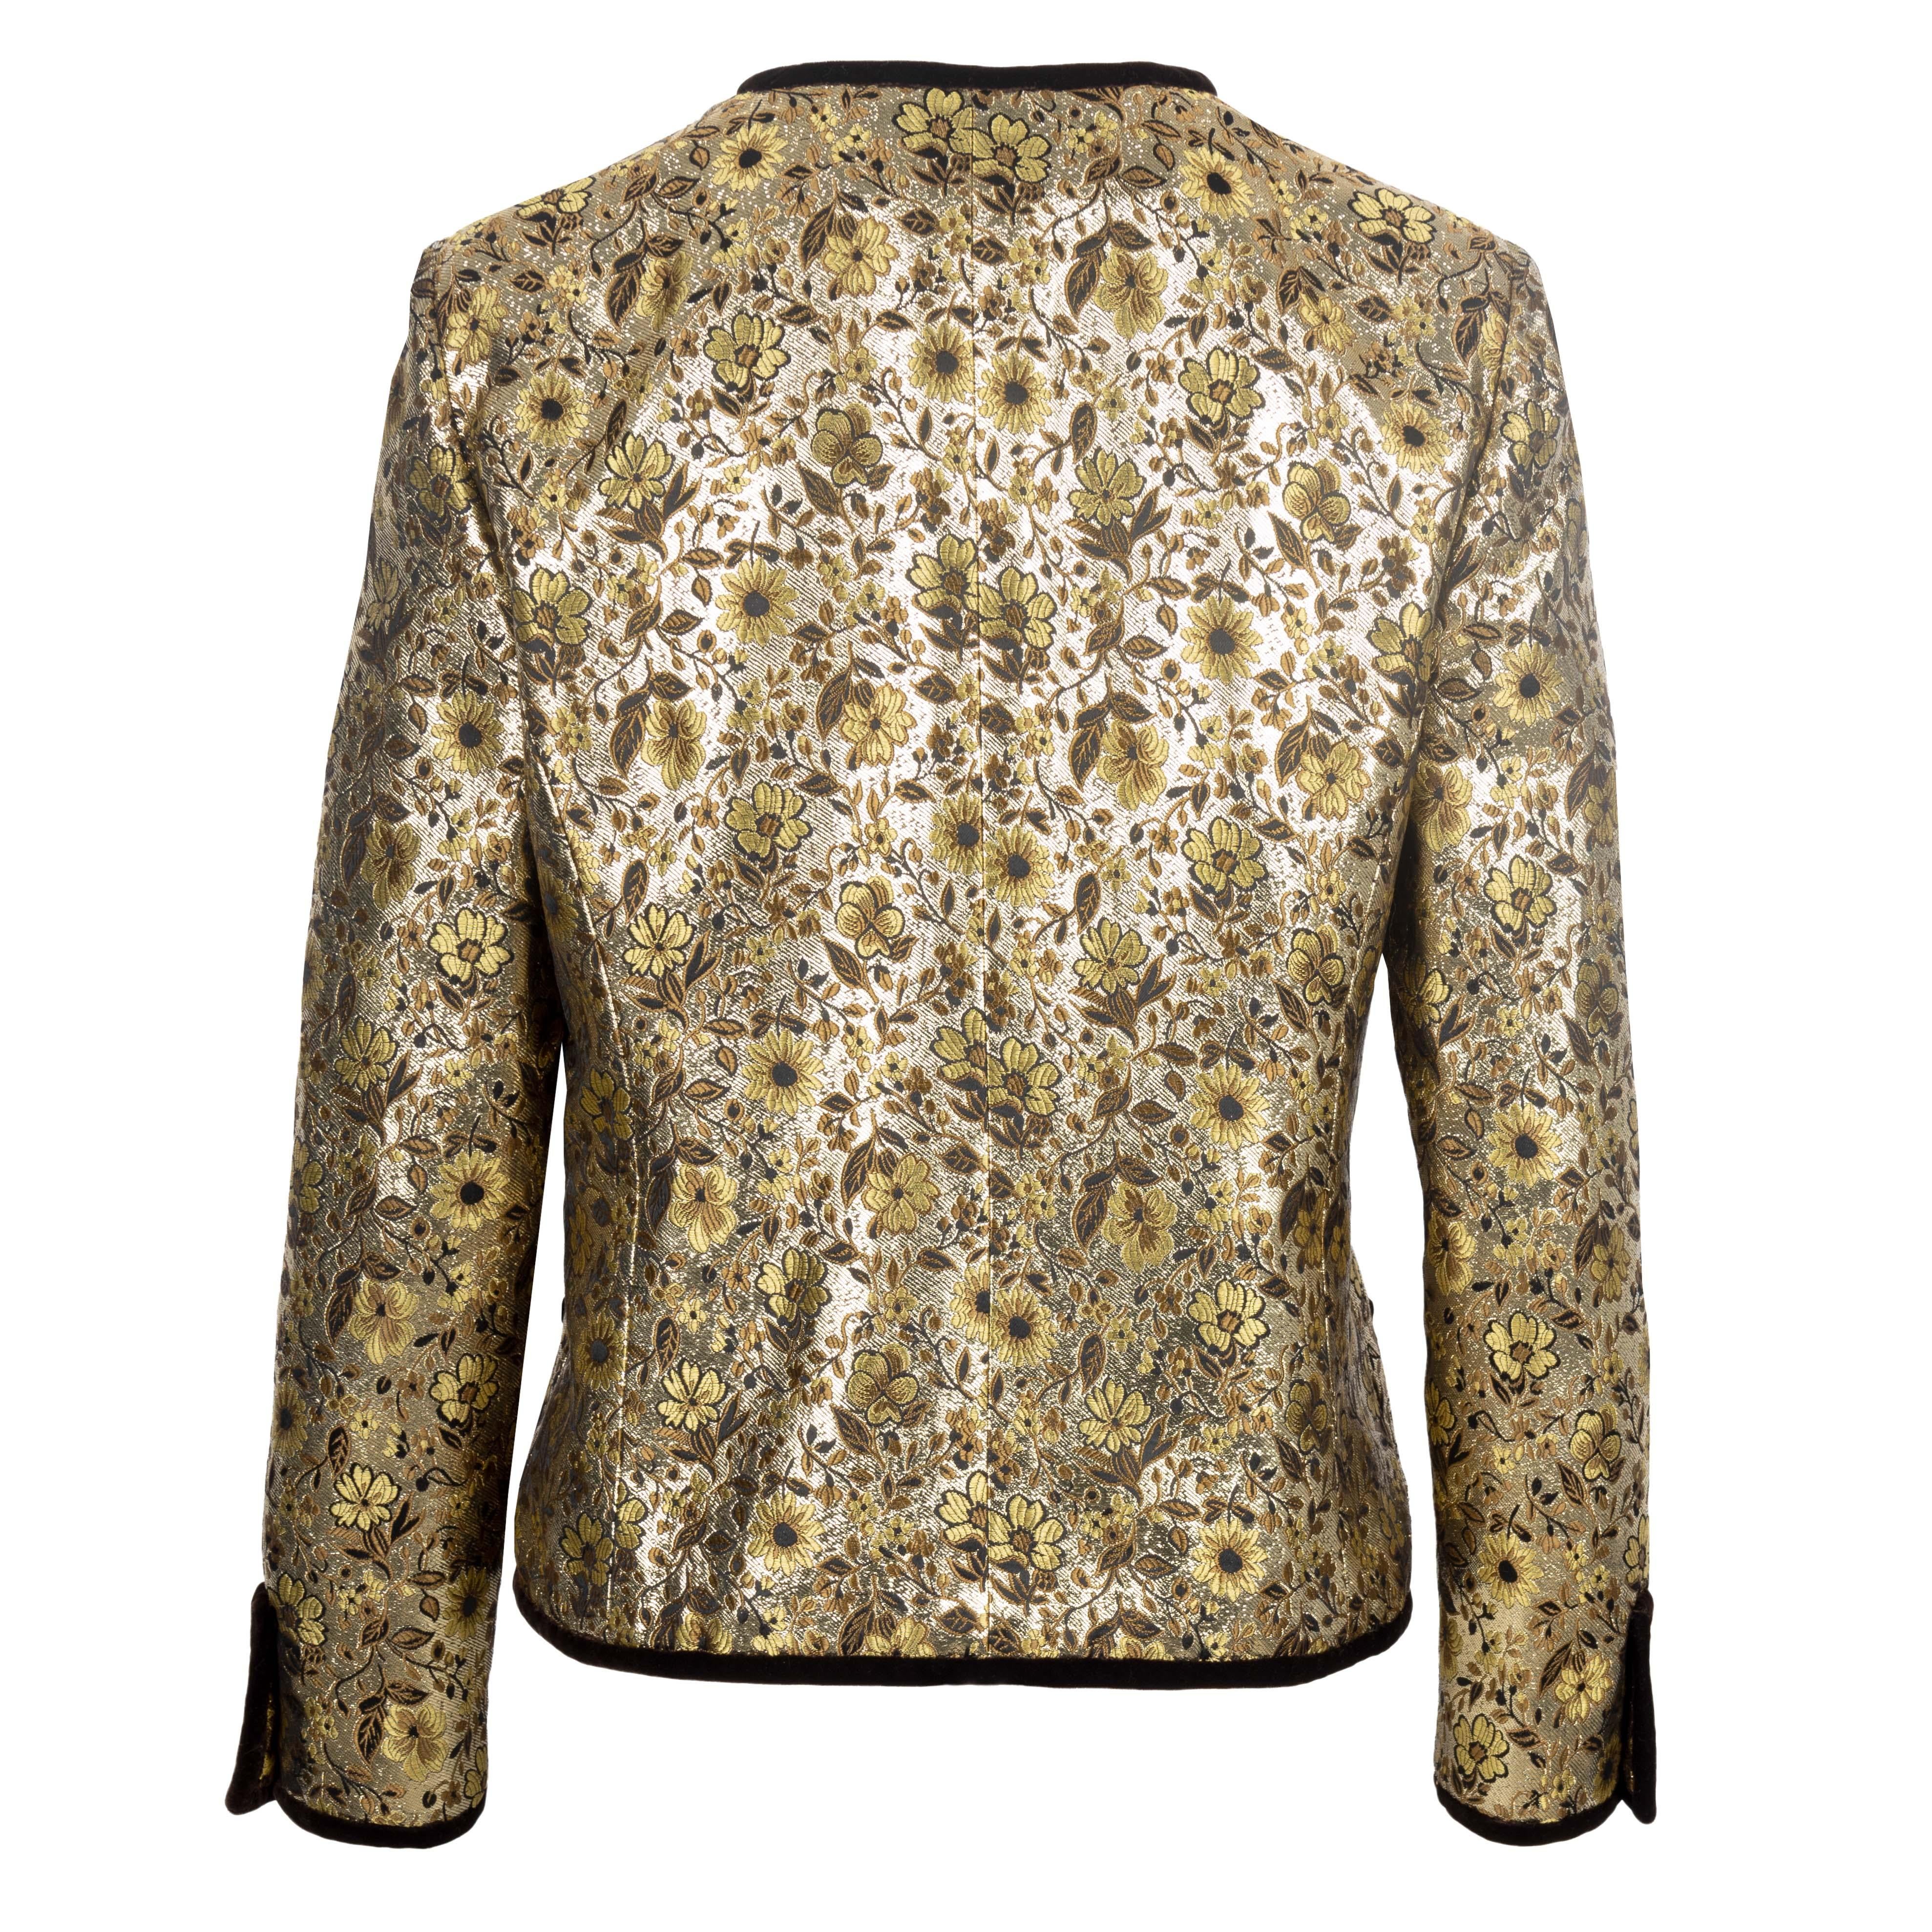 Valentino Night Floral Brocade Jacket and Dress Suit For Sale 4